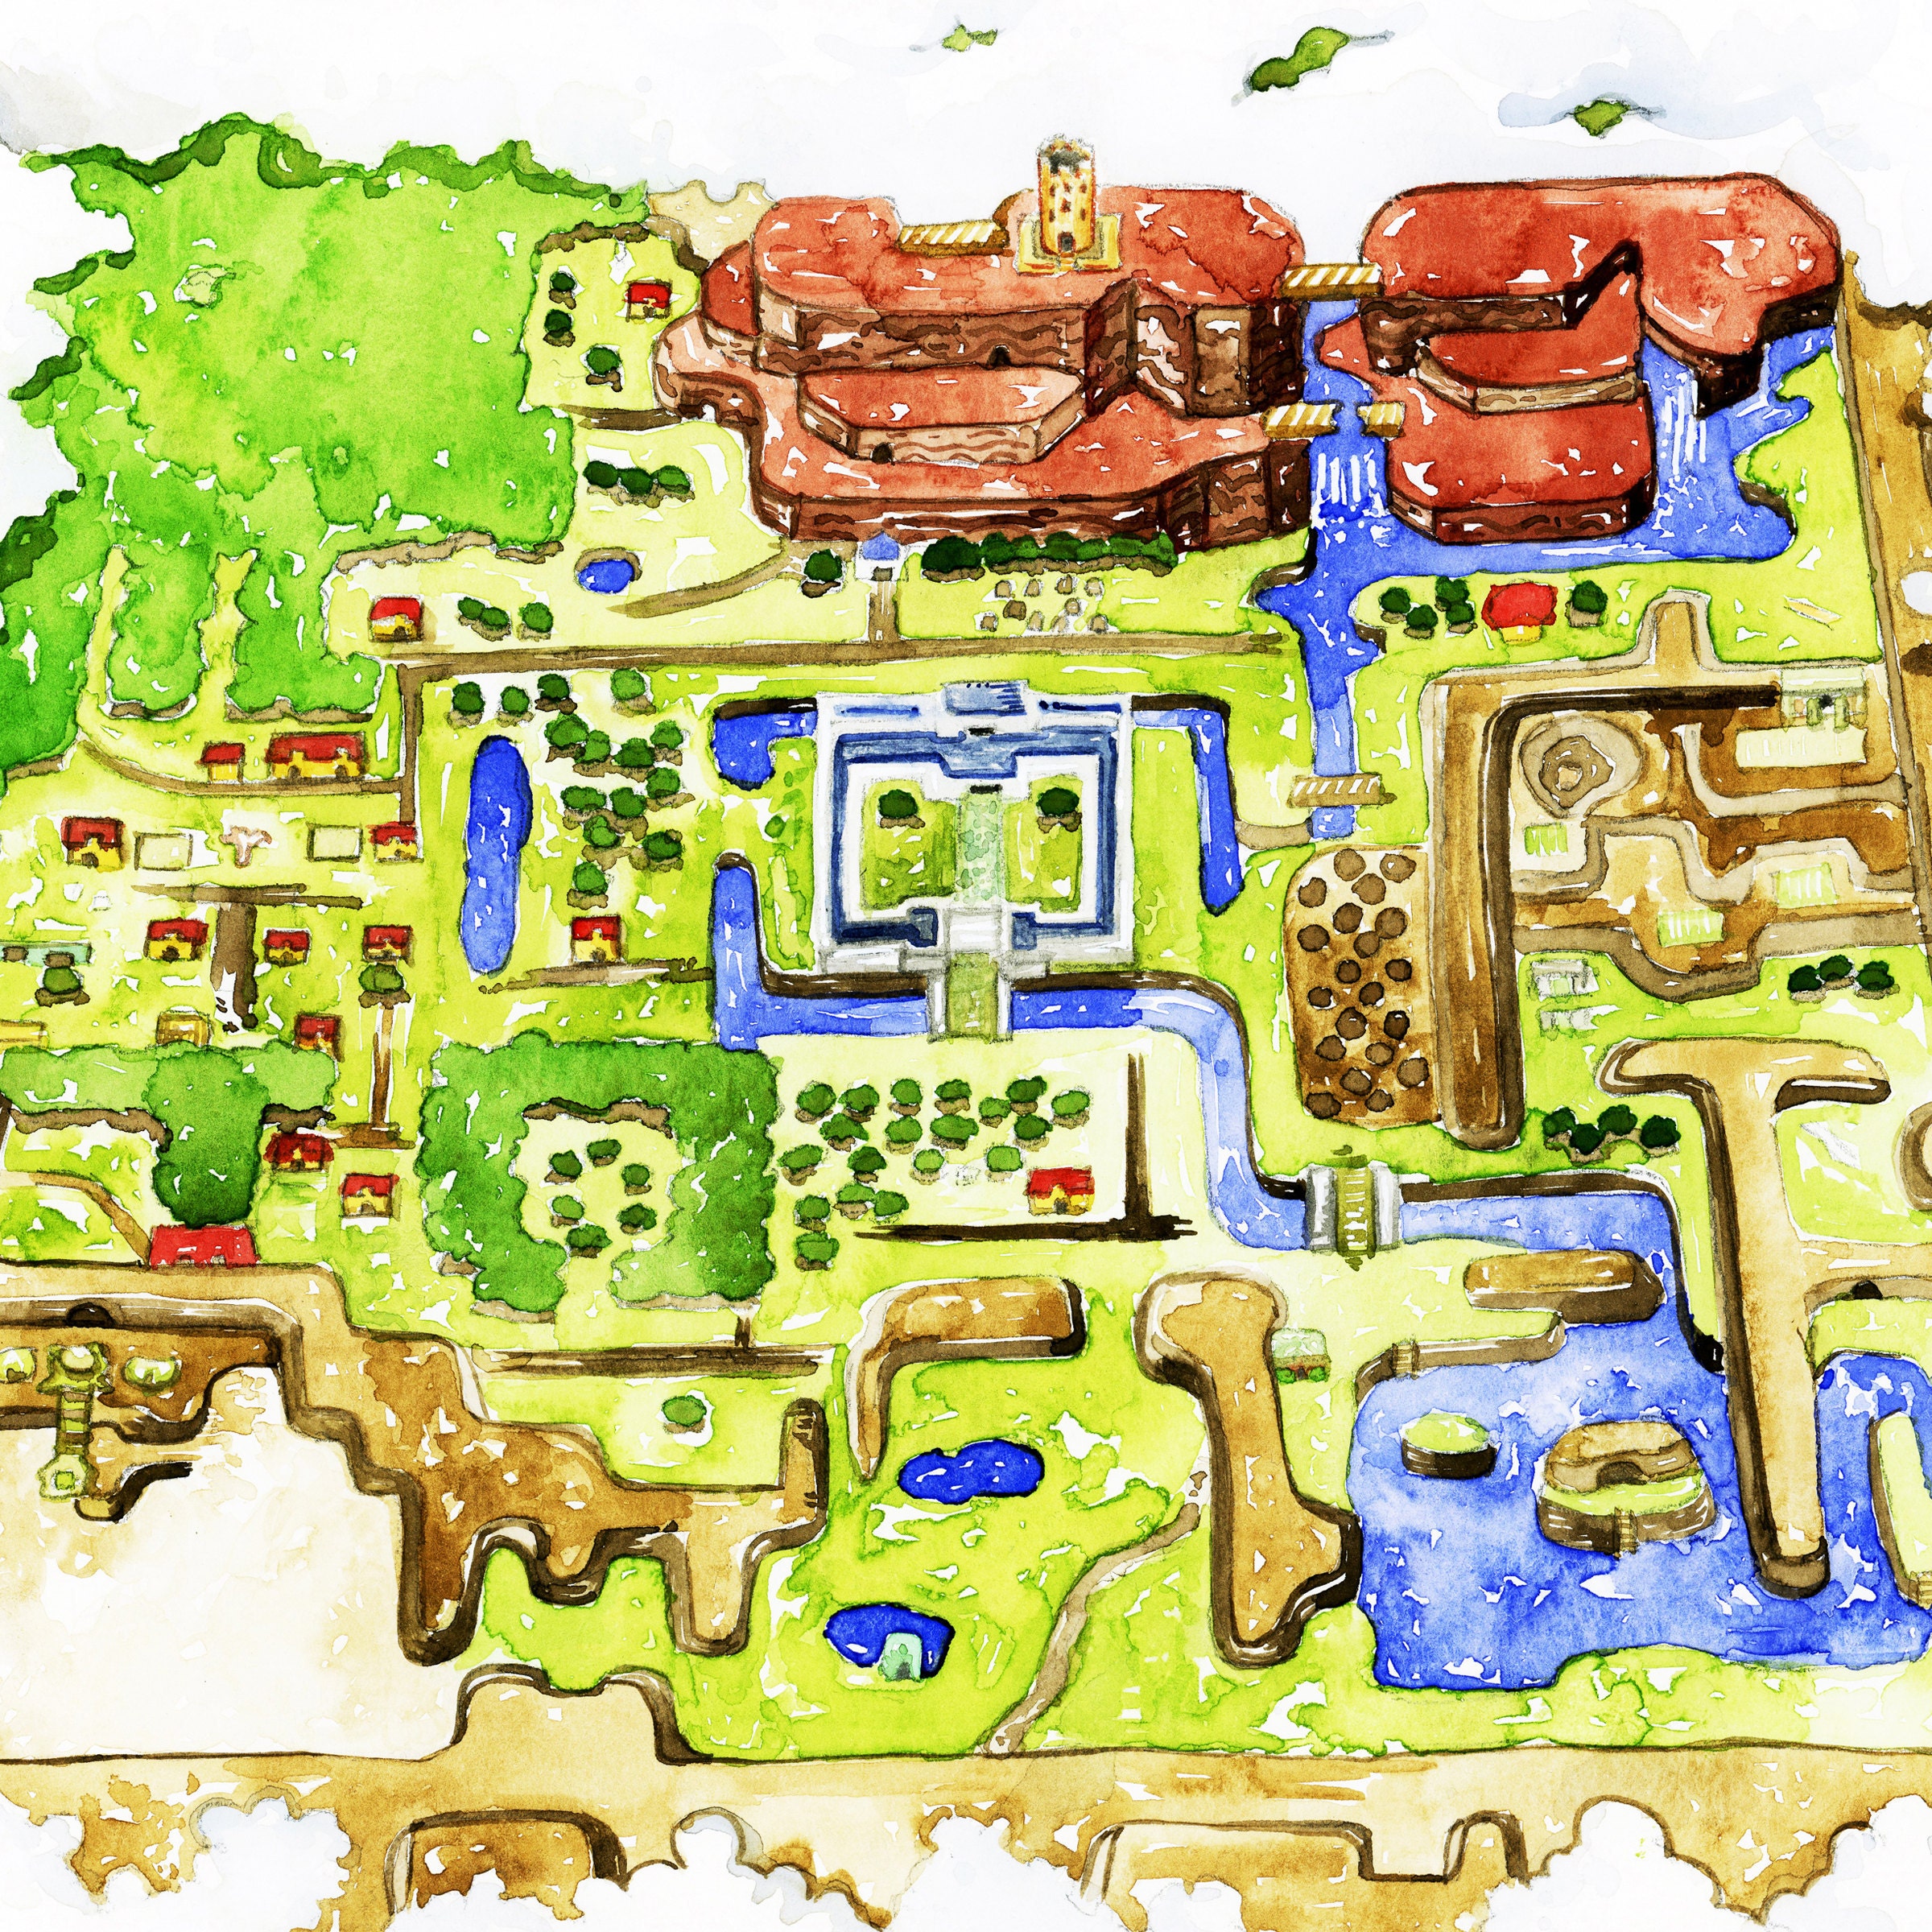 Download Pokemon Kanto RPG WC3 Map [Role Play Game (RPG)]